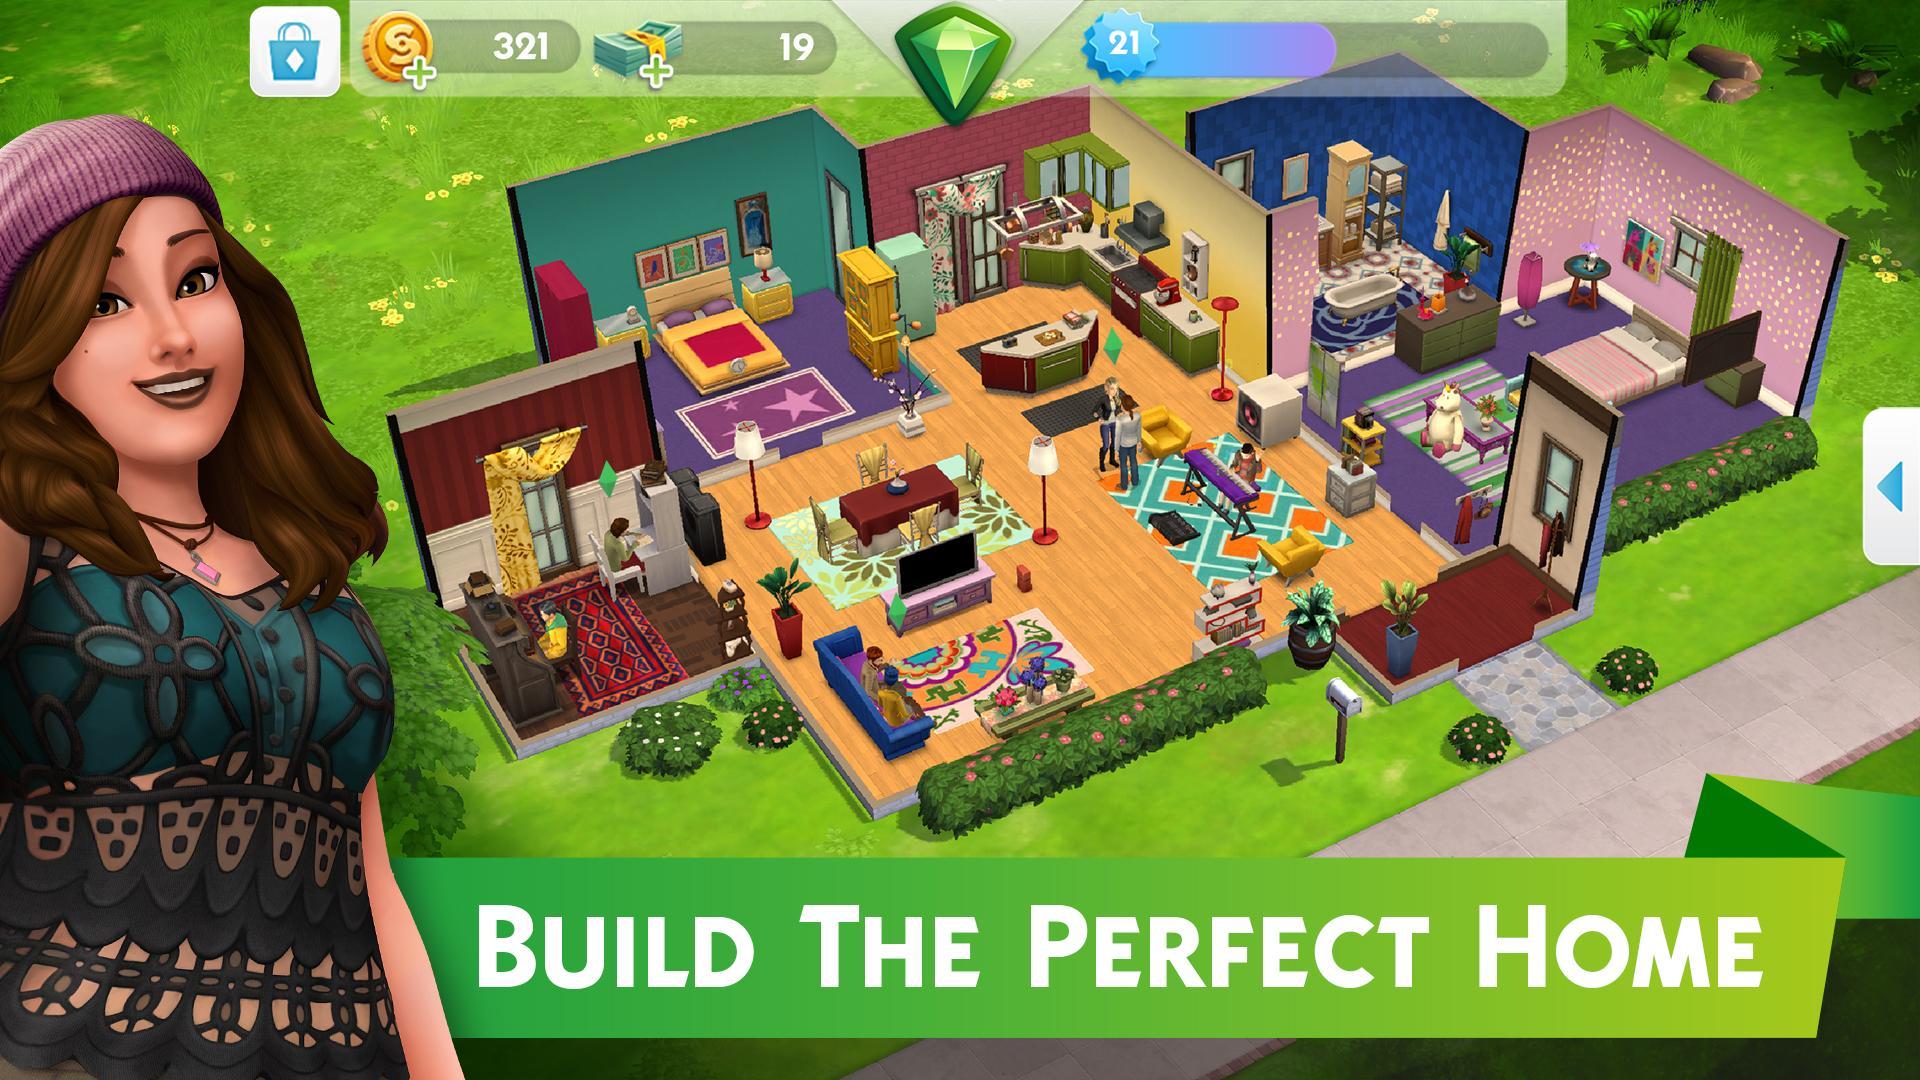 screen 9 - The Sims Mobile Mod Apk V34.0.2.136361 (Unlimited Money)